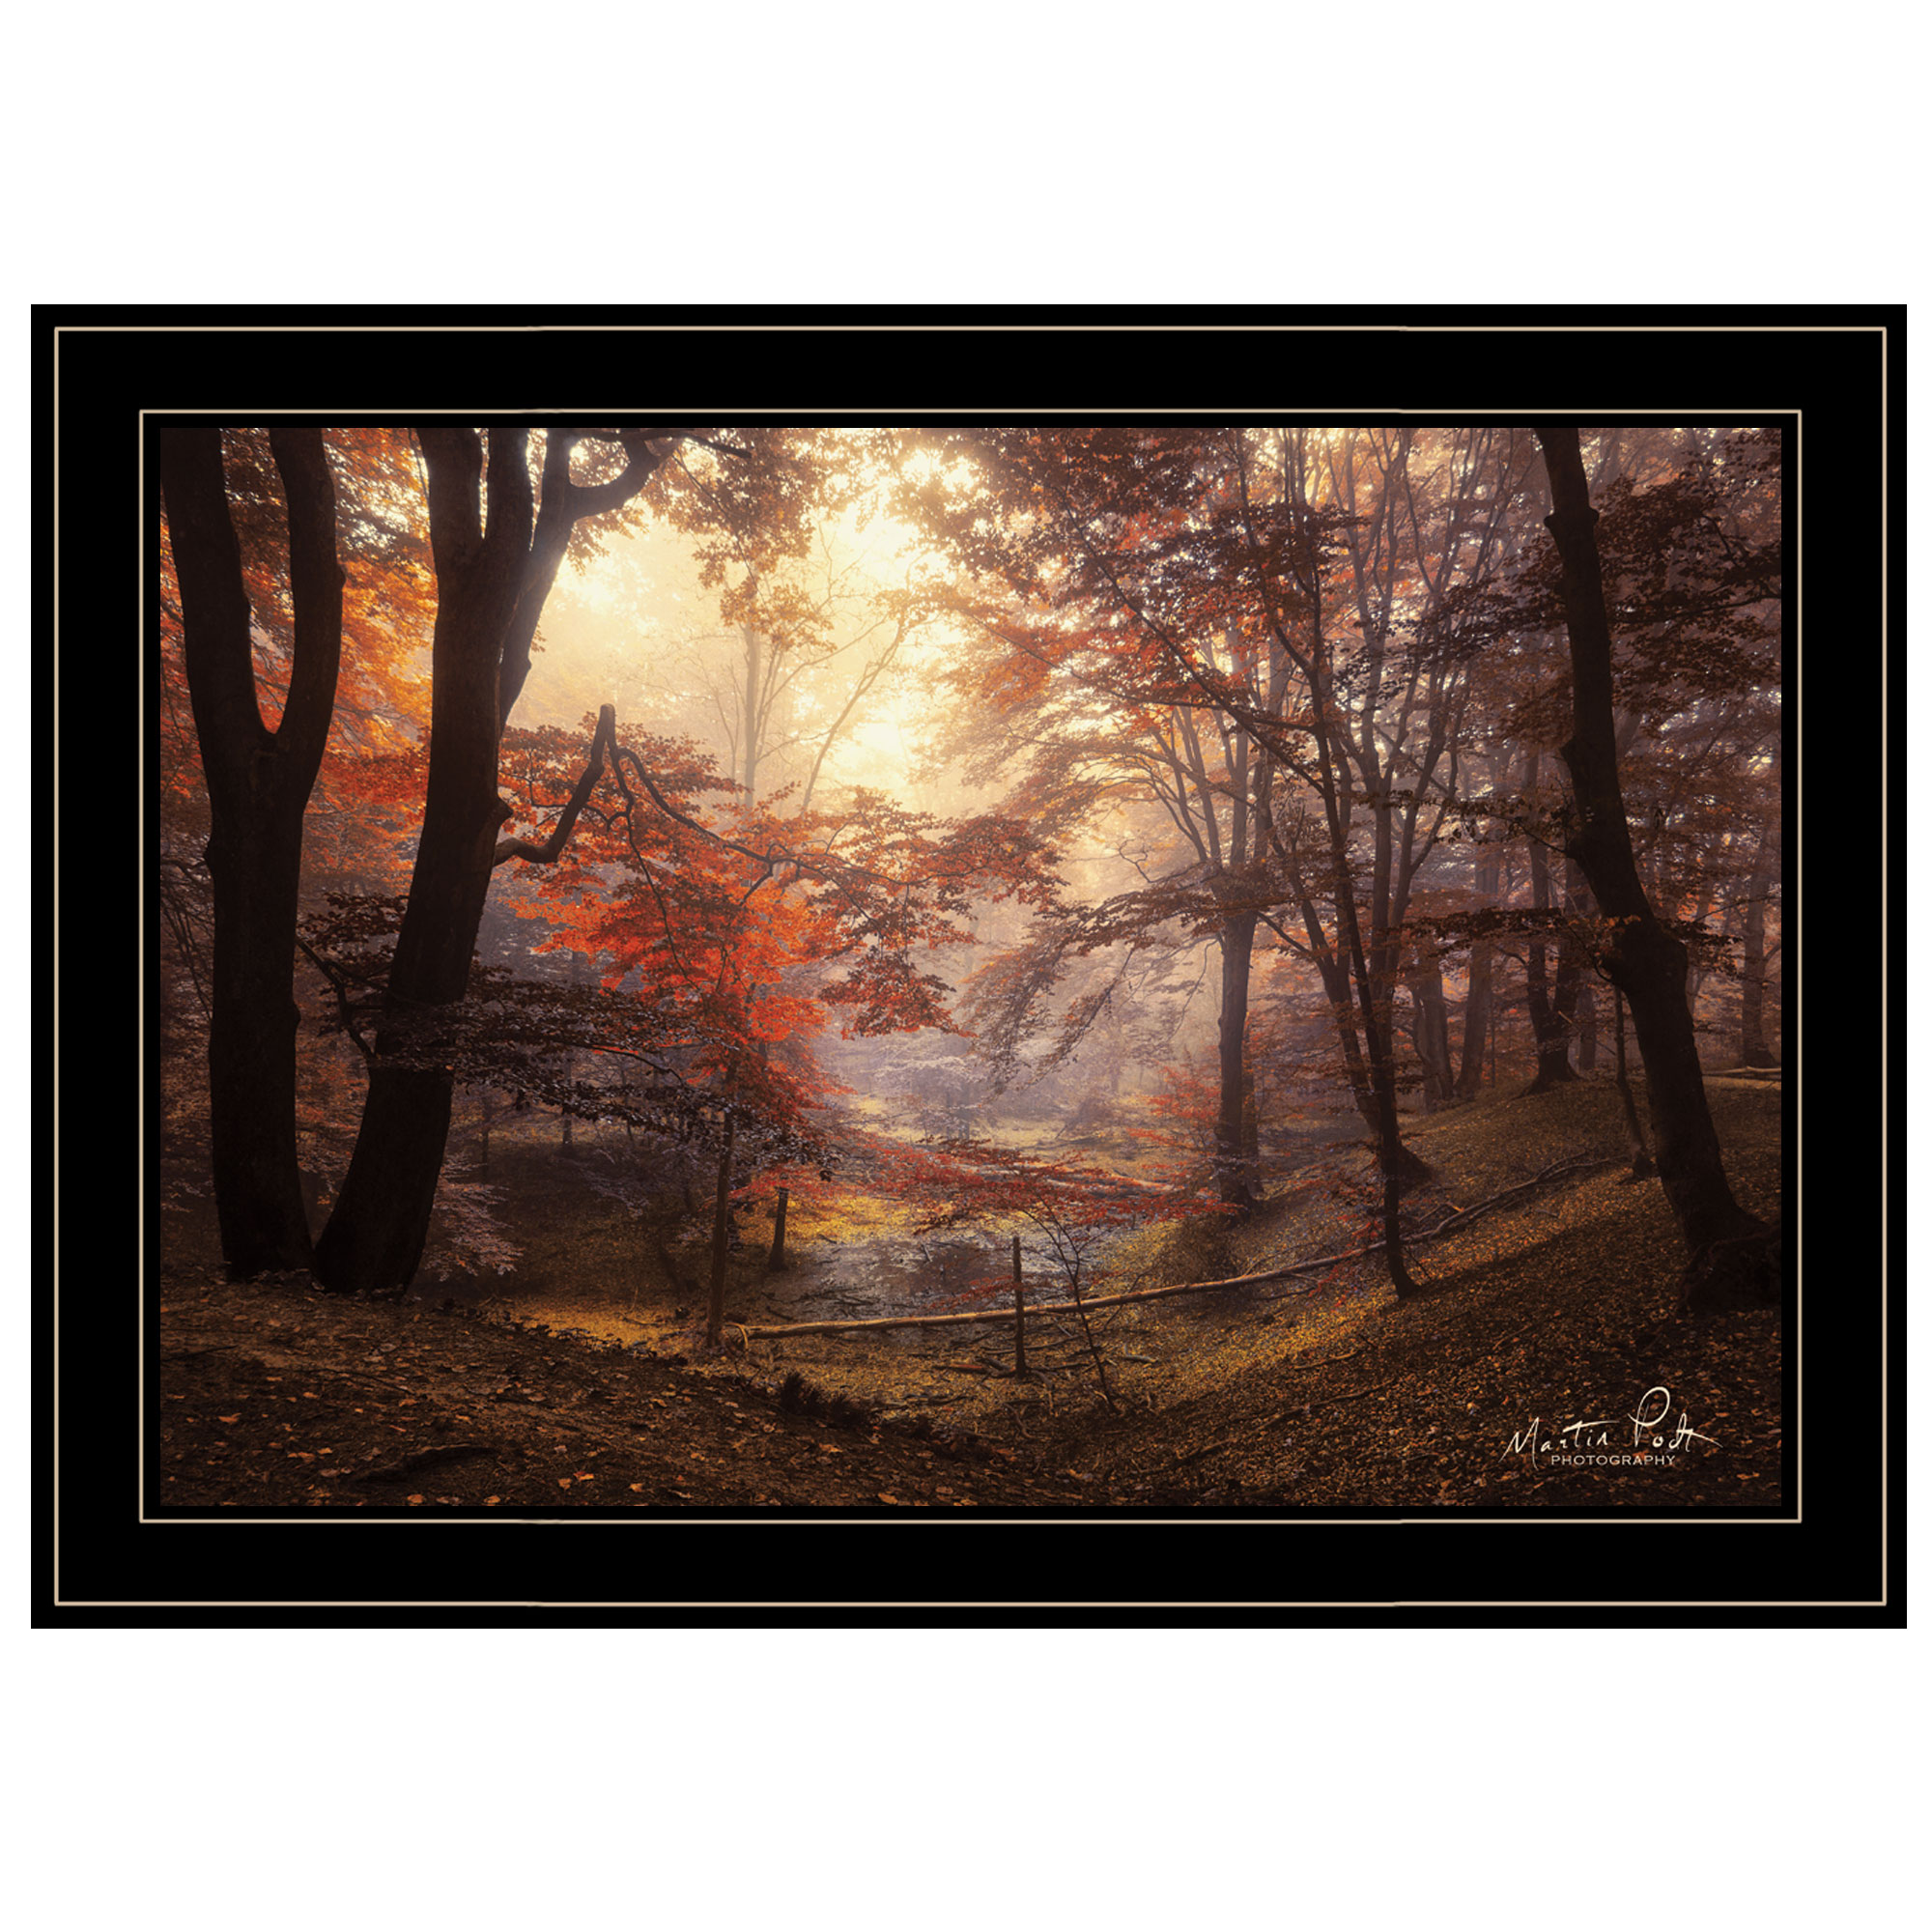 "The Pool" by Martin Podt, Ready to Hang Framed Print, Black Frame